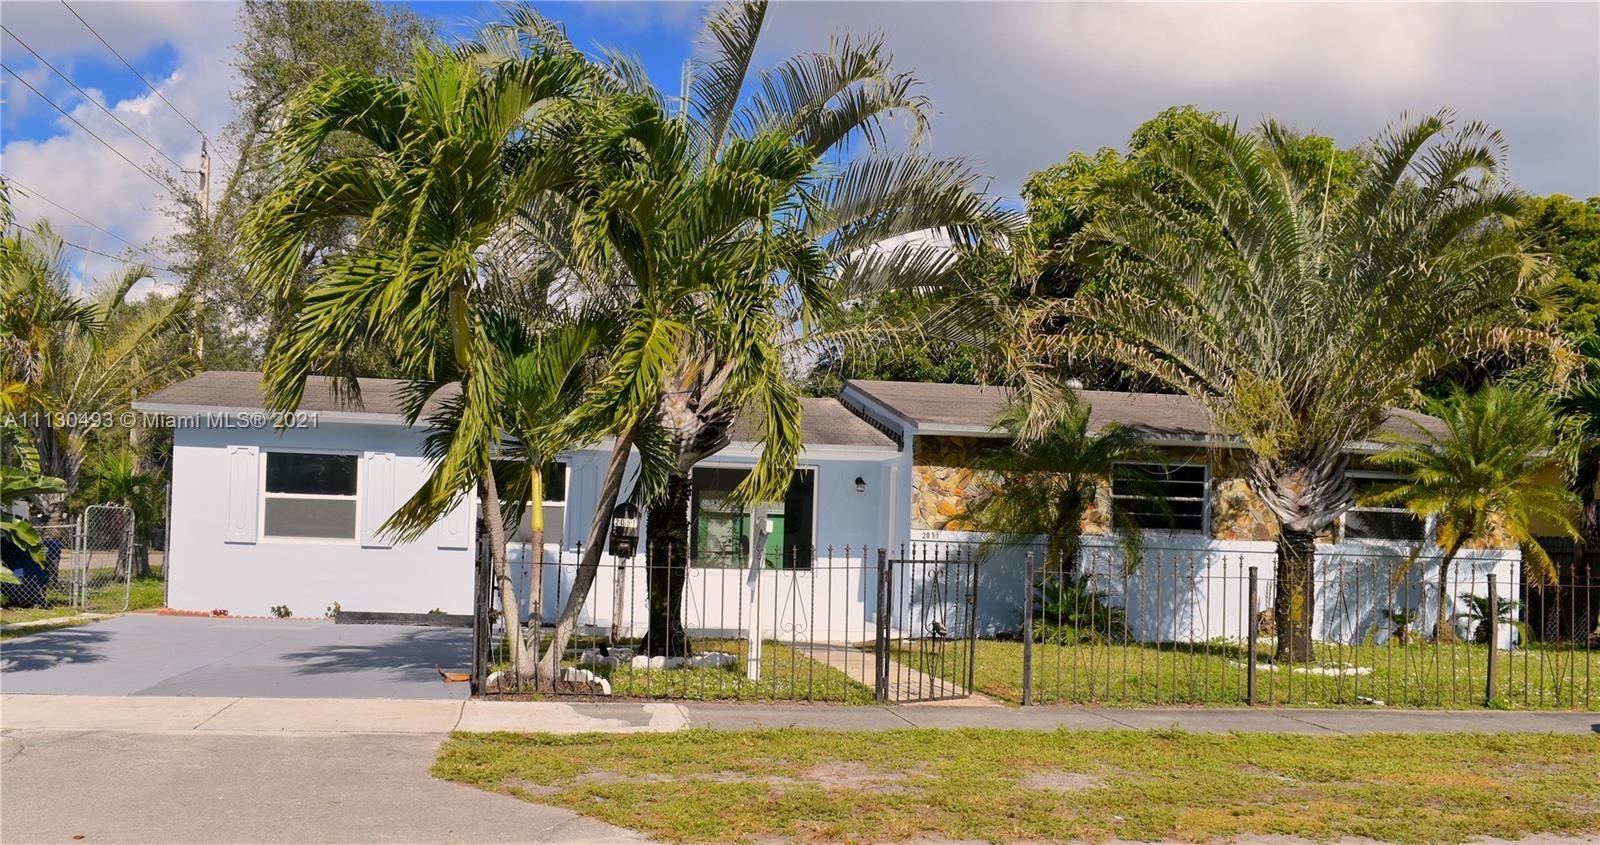 Real estate property located at 2051 93rd St, Miami-Dade County, Miami, FL